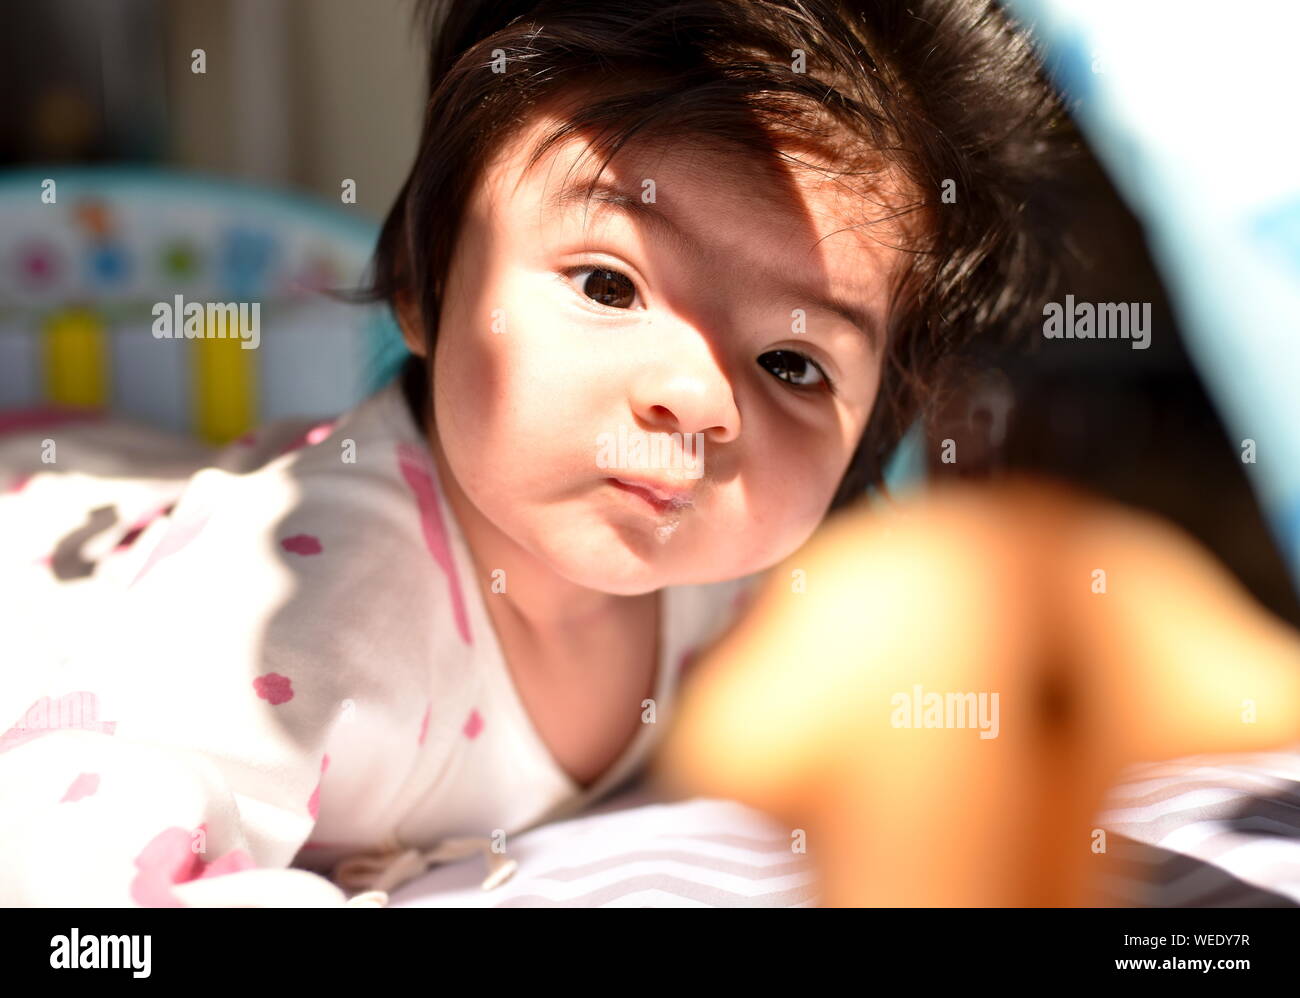 Cute mixed race baby girl looks attentively at her toys in nursery Stock Photo